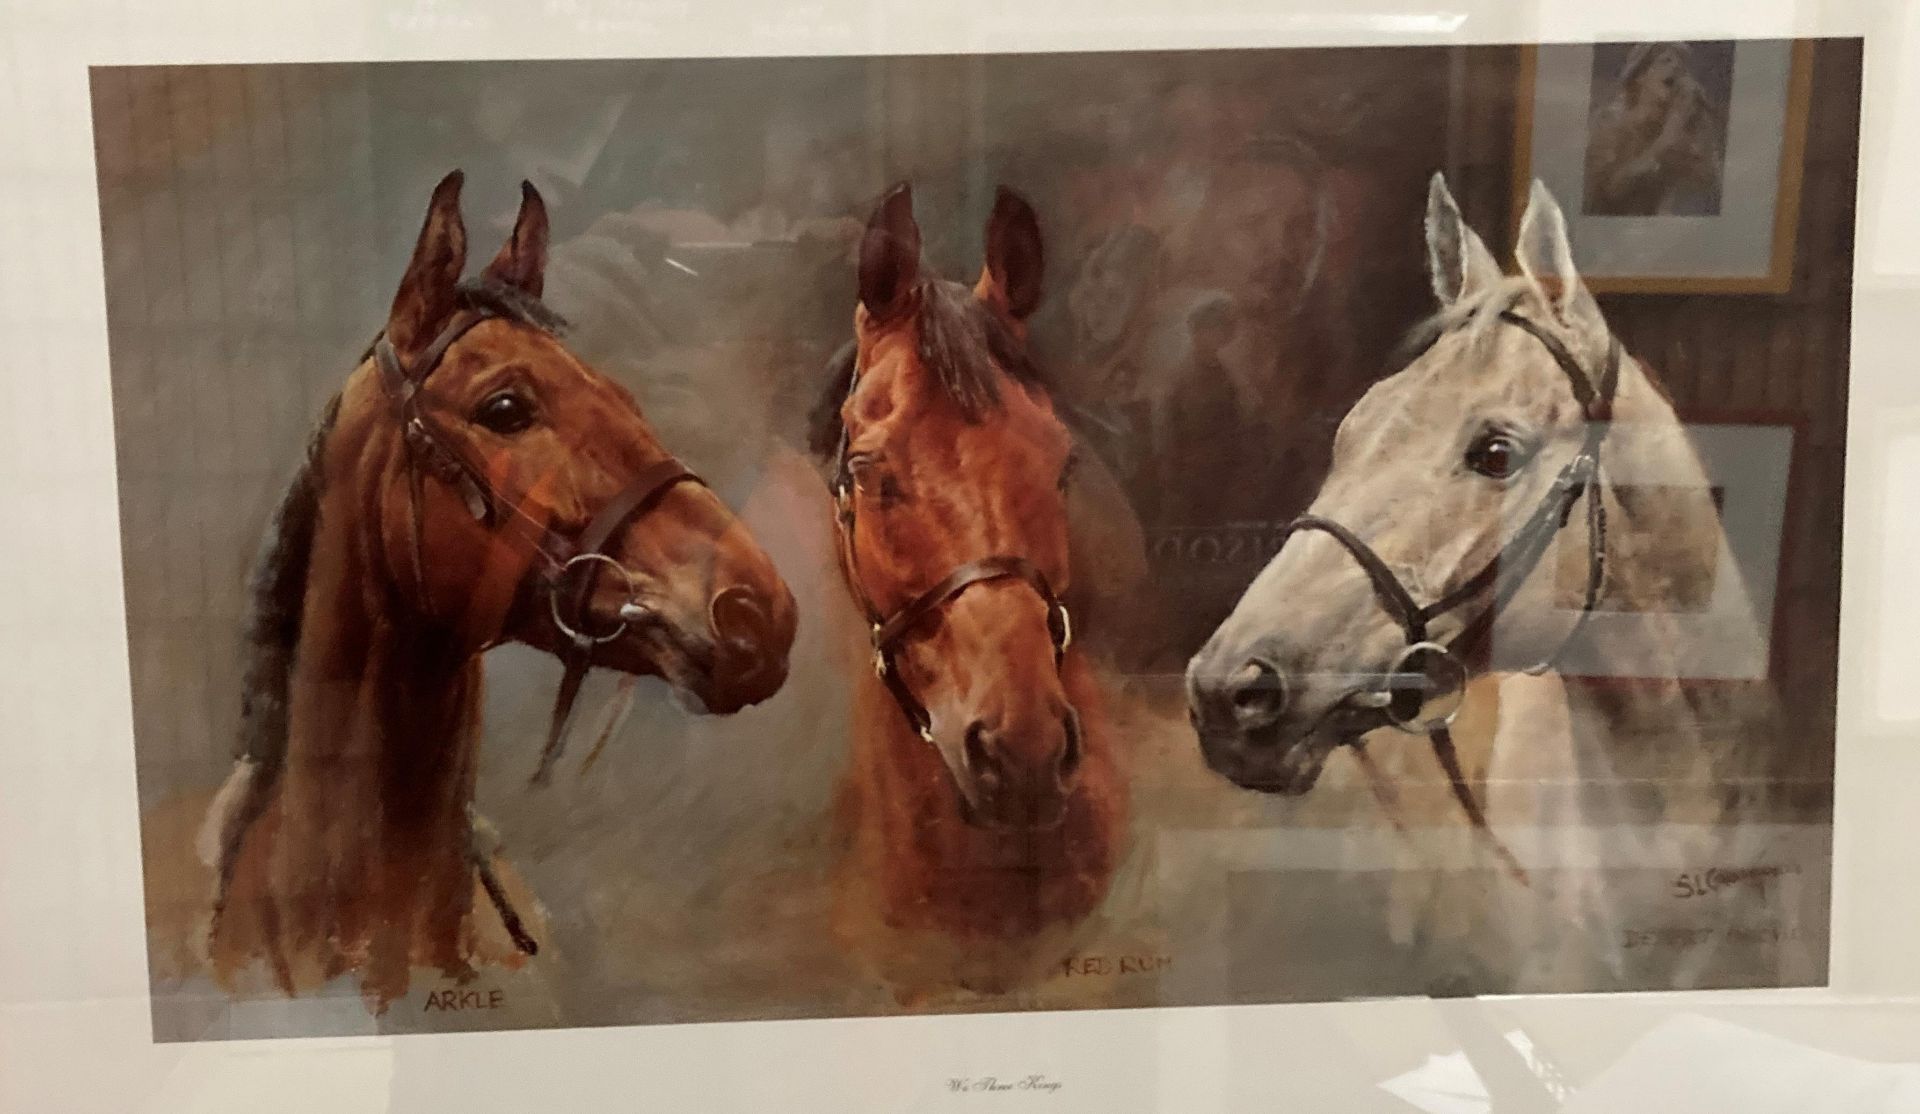 S L Crawford, framed print 'The Three Kings' - Desert Orchid, Red Rum and Arkle,